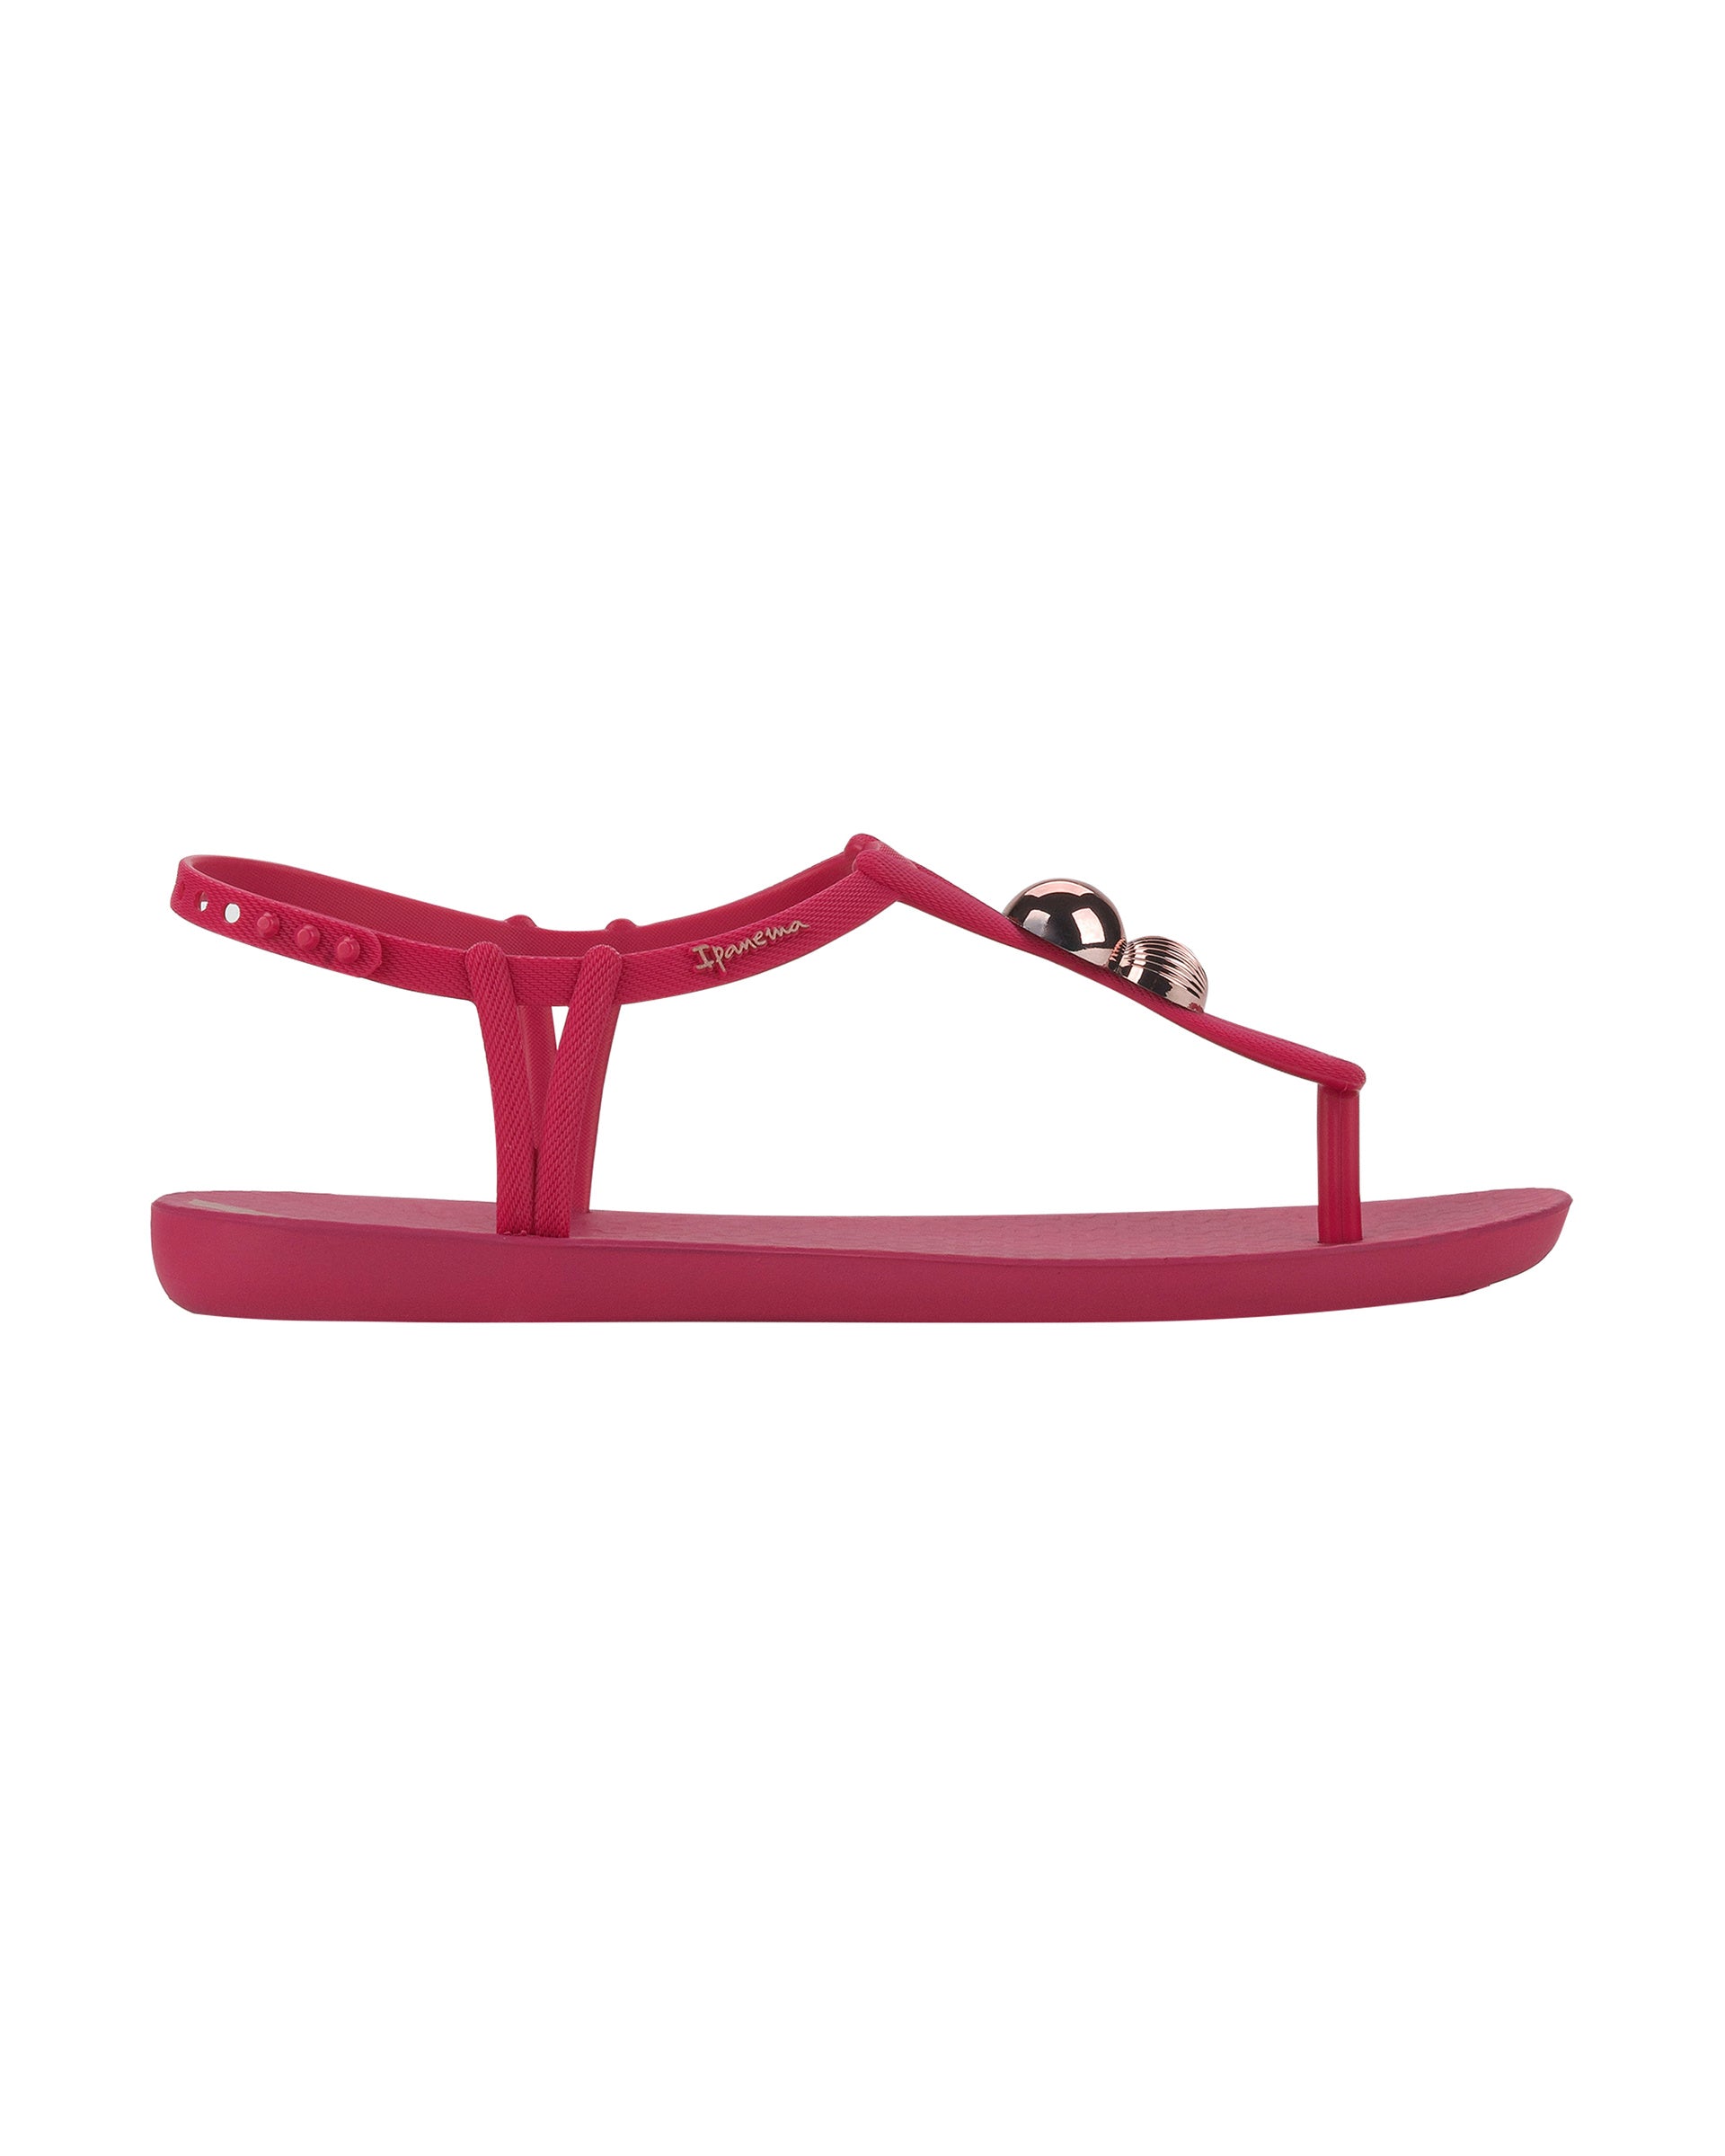 Outer side view of a pink Ipanema Class Spheres women's t-strap sandal with metallic bauble.